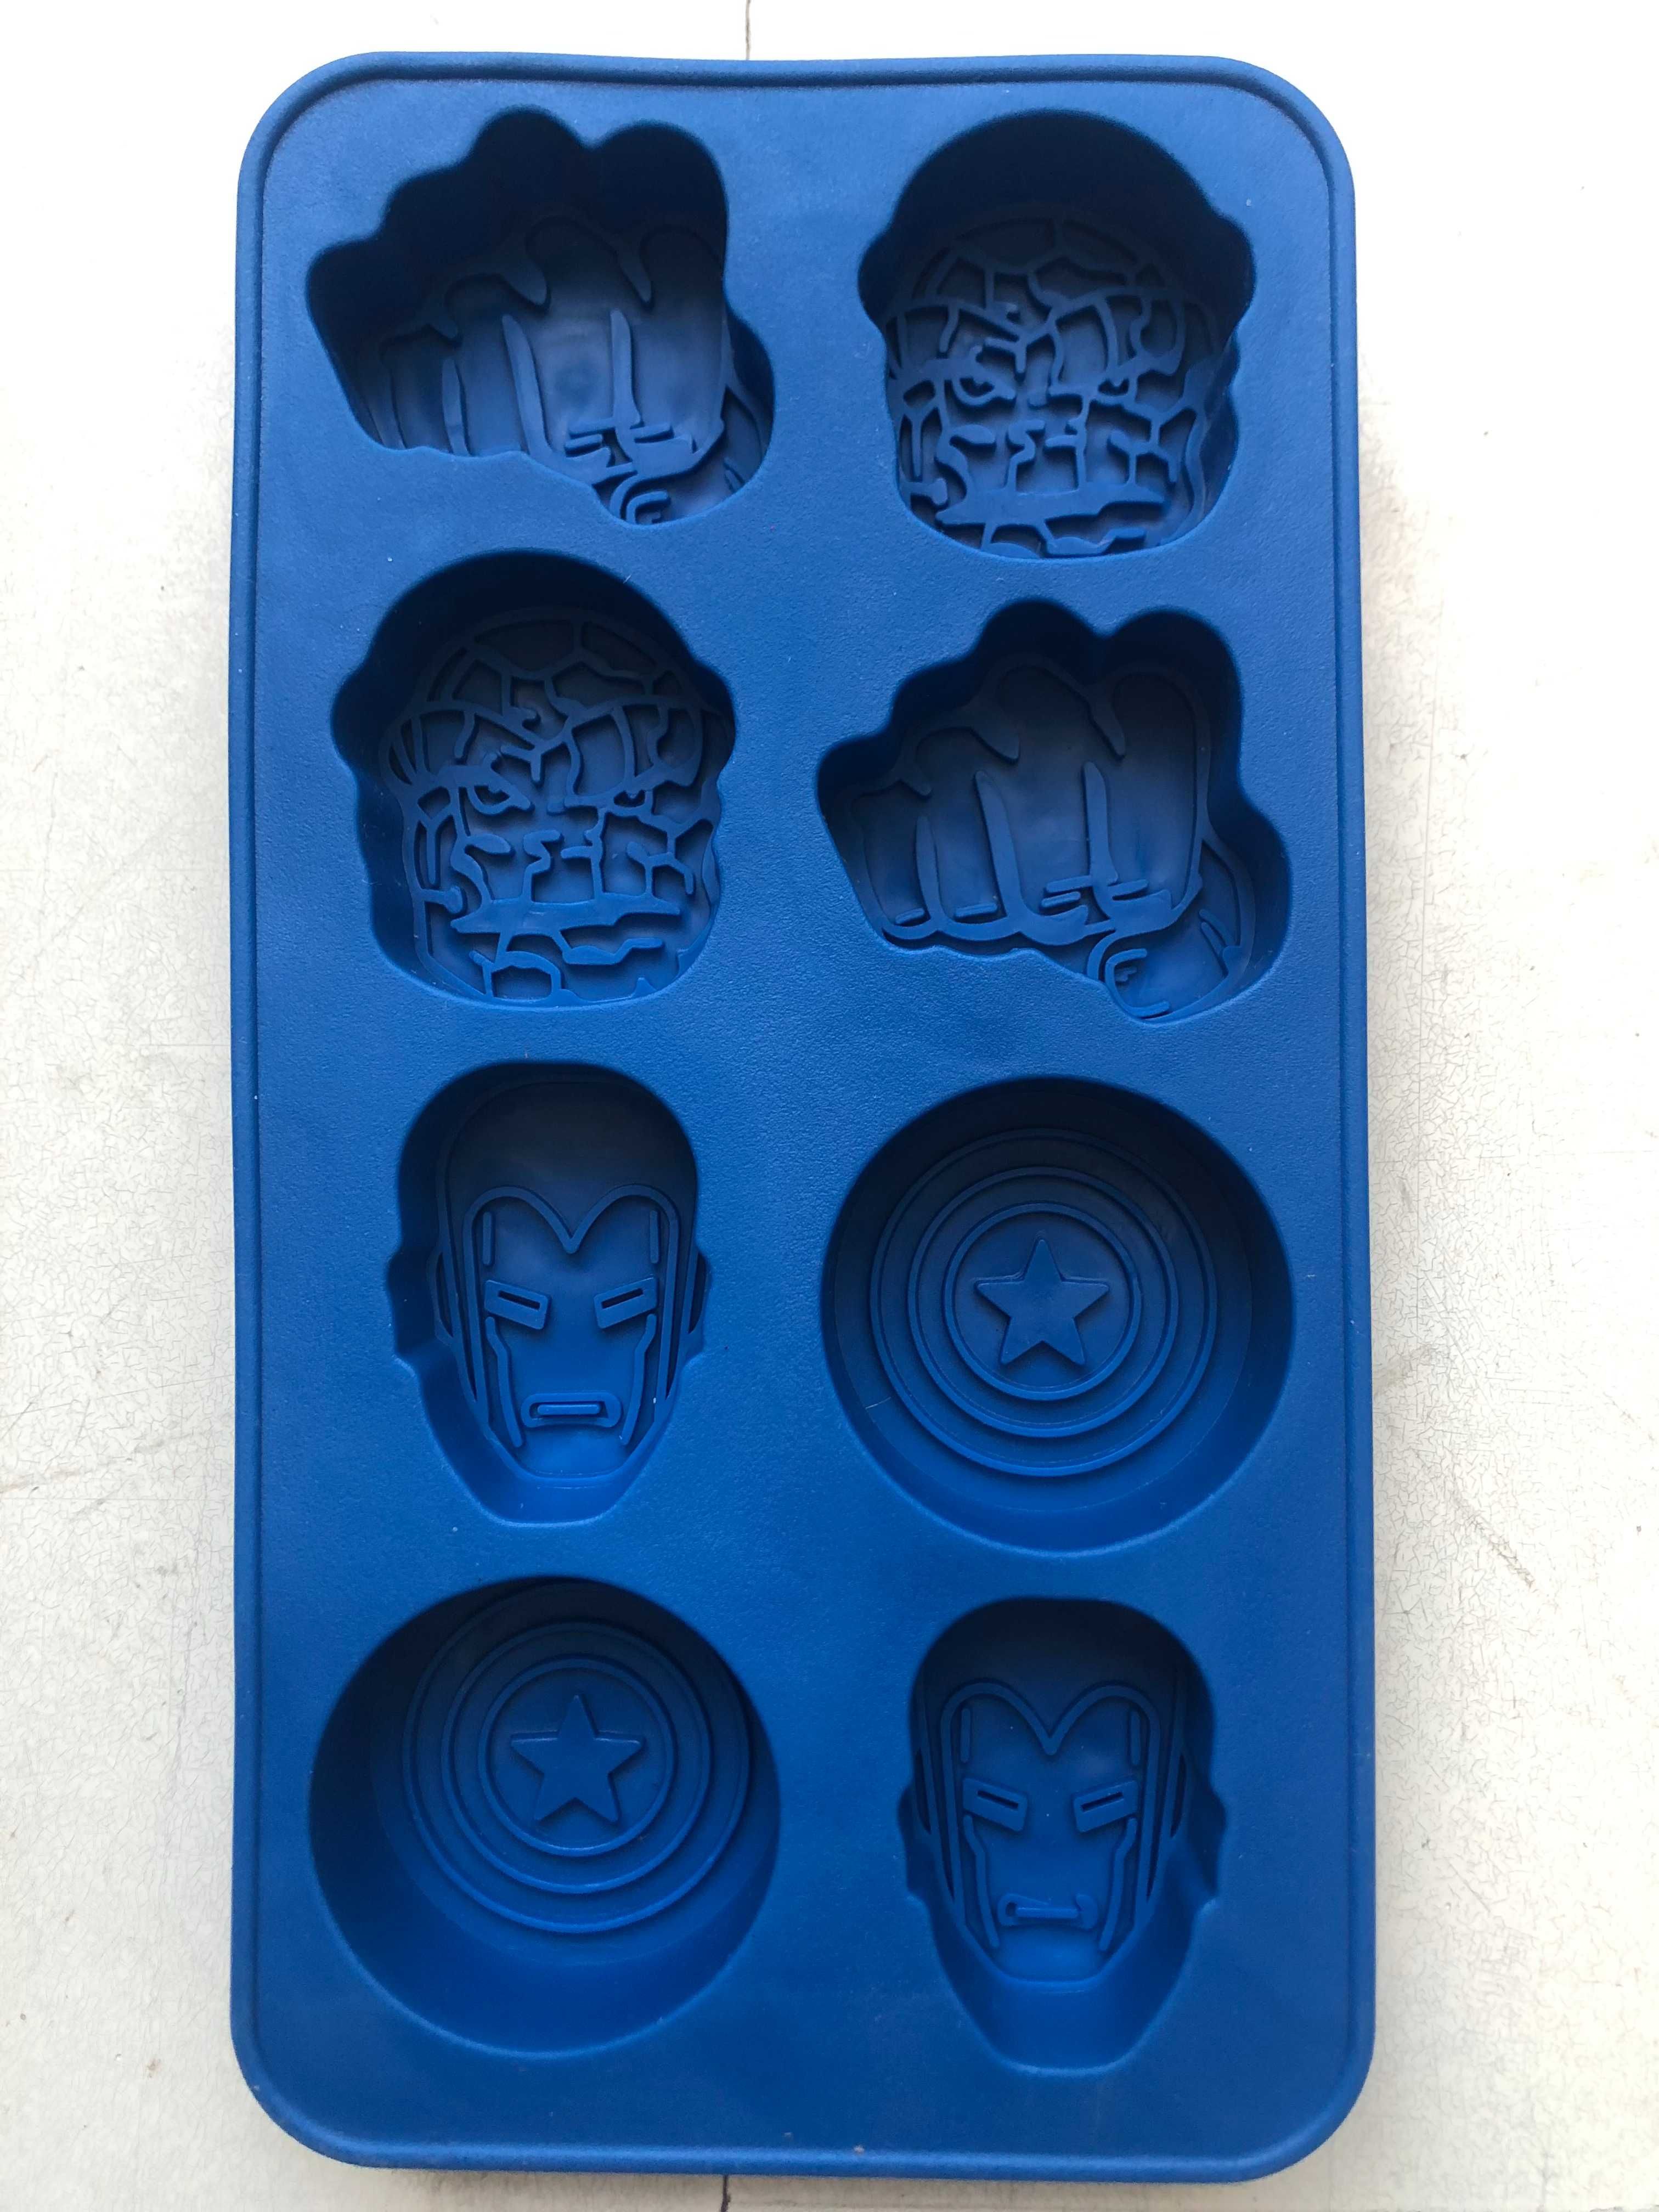 Marvel - Couvete Gelo/Molde Chocolate